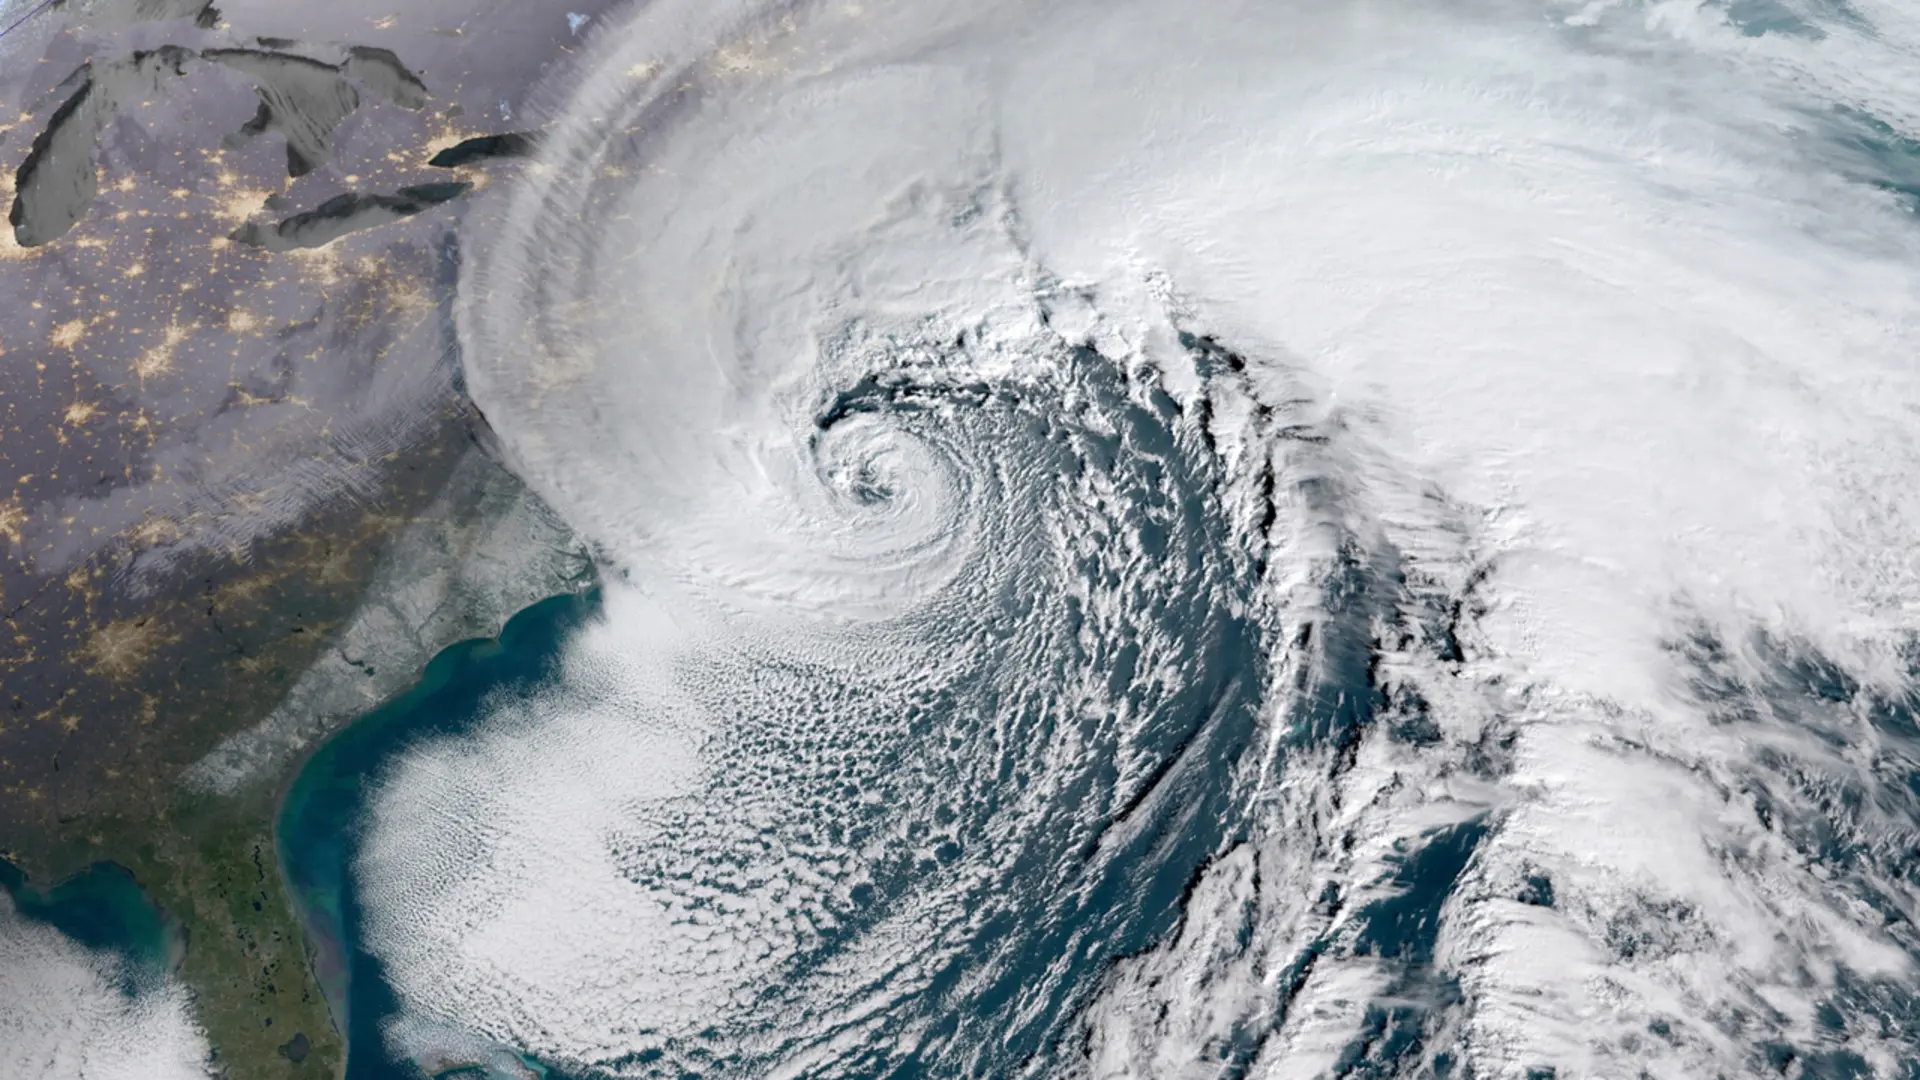 Science behind the weather: The infamous nor'easter